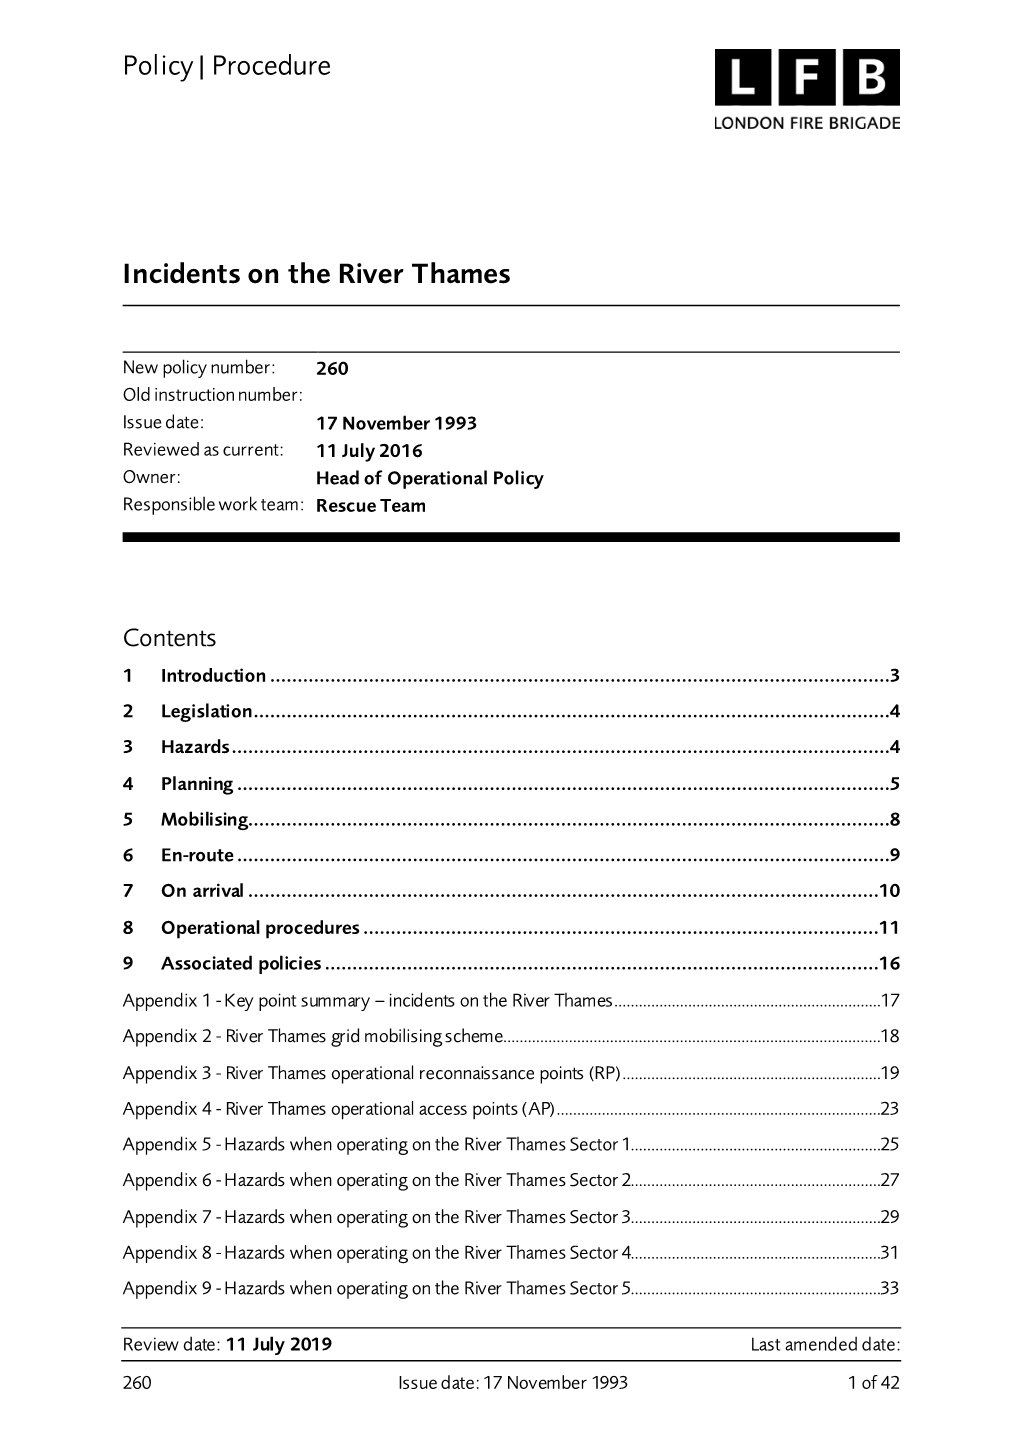 Policy Number 260 | Incidents on the Thames